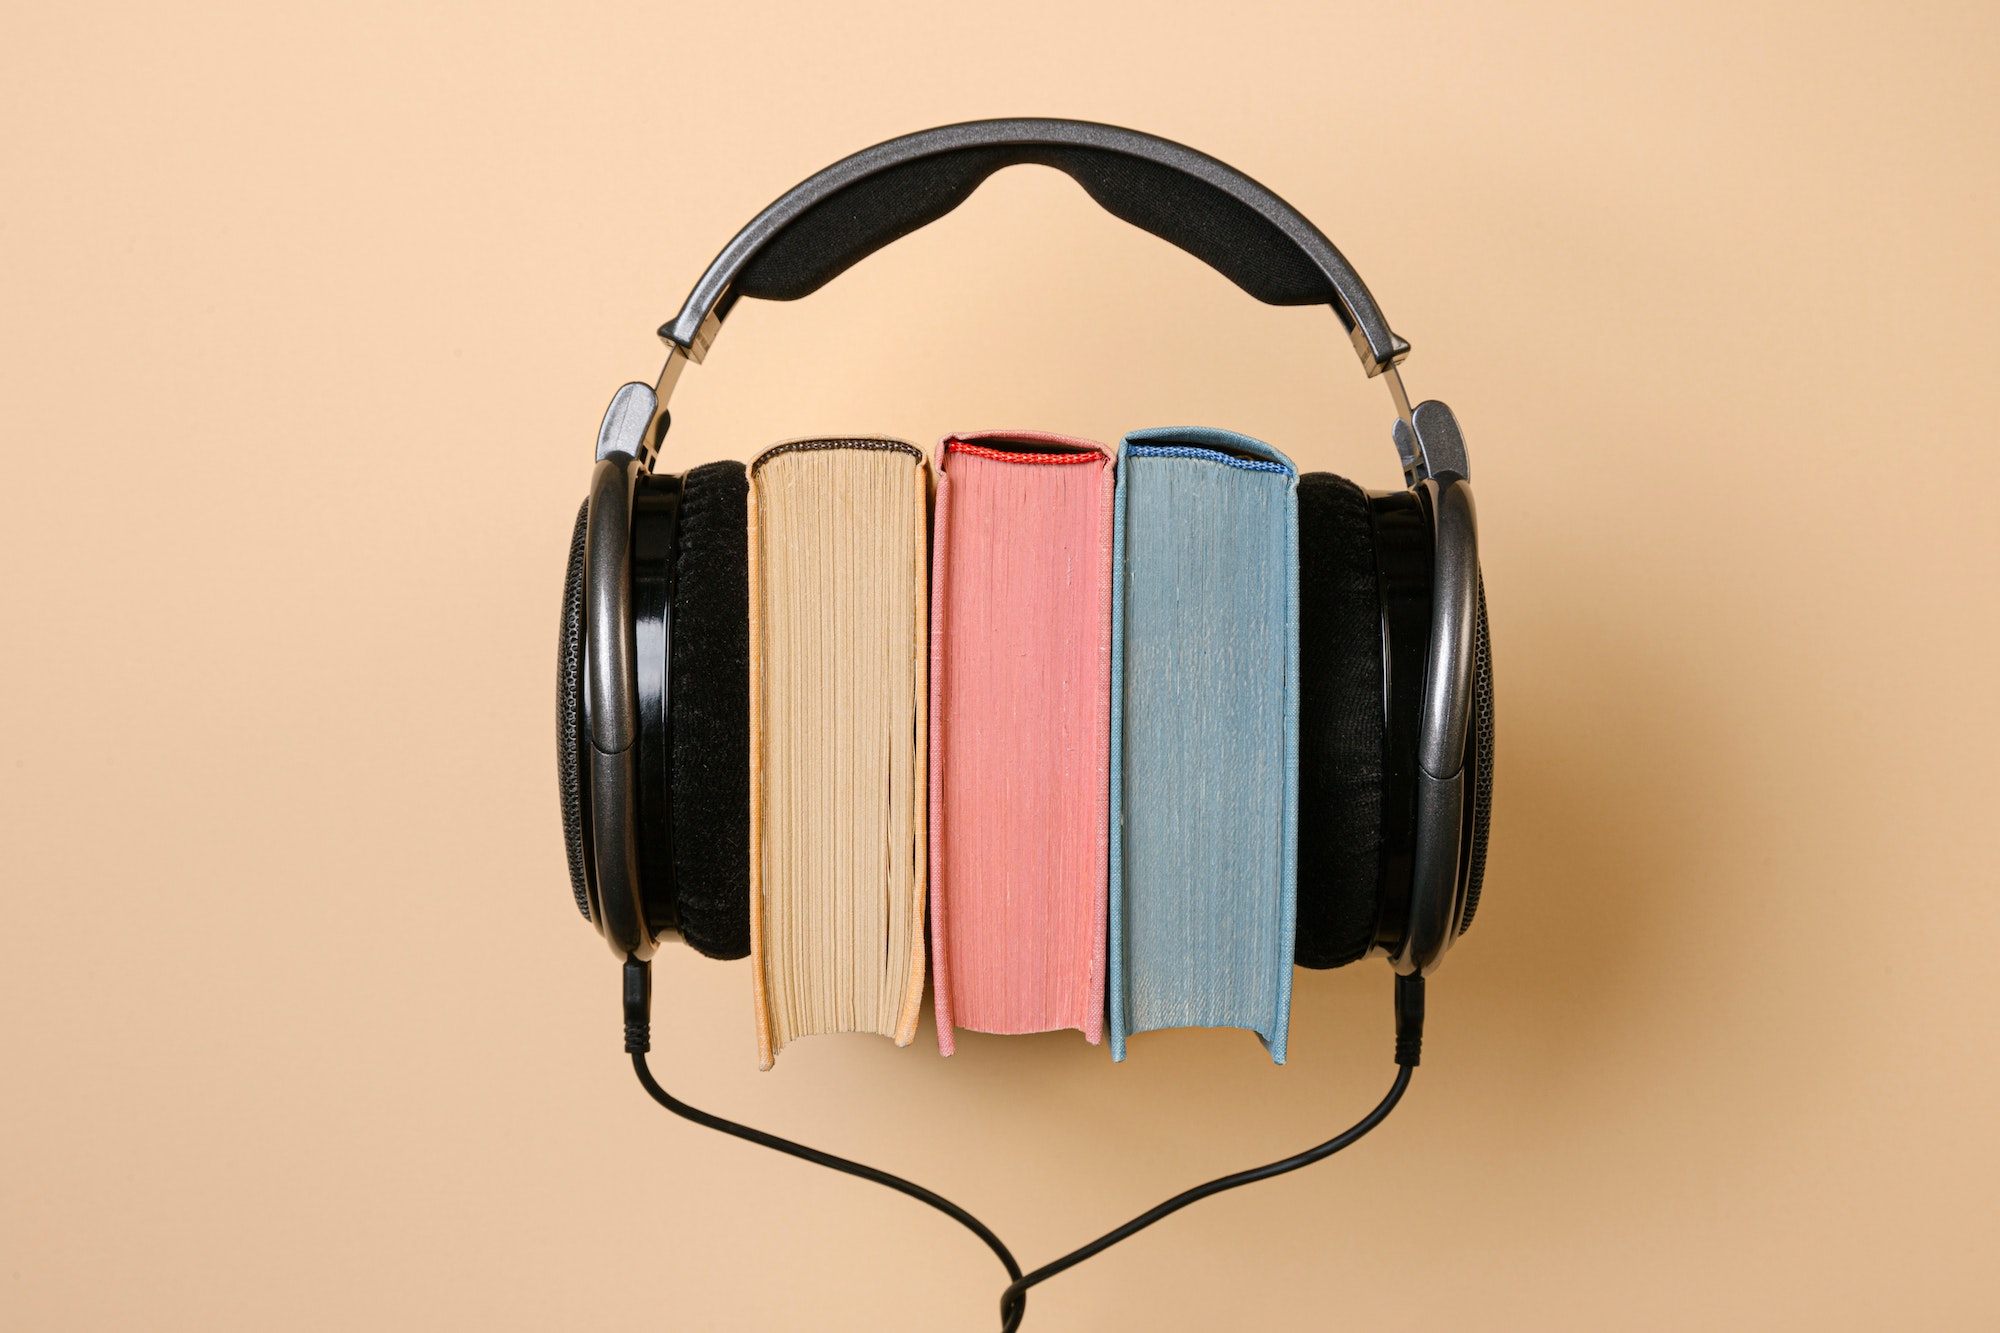 A stack of books with headphones on either side